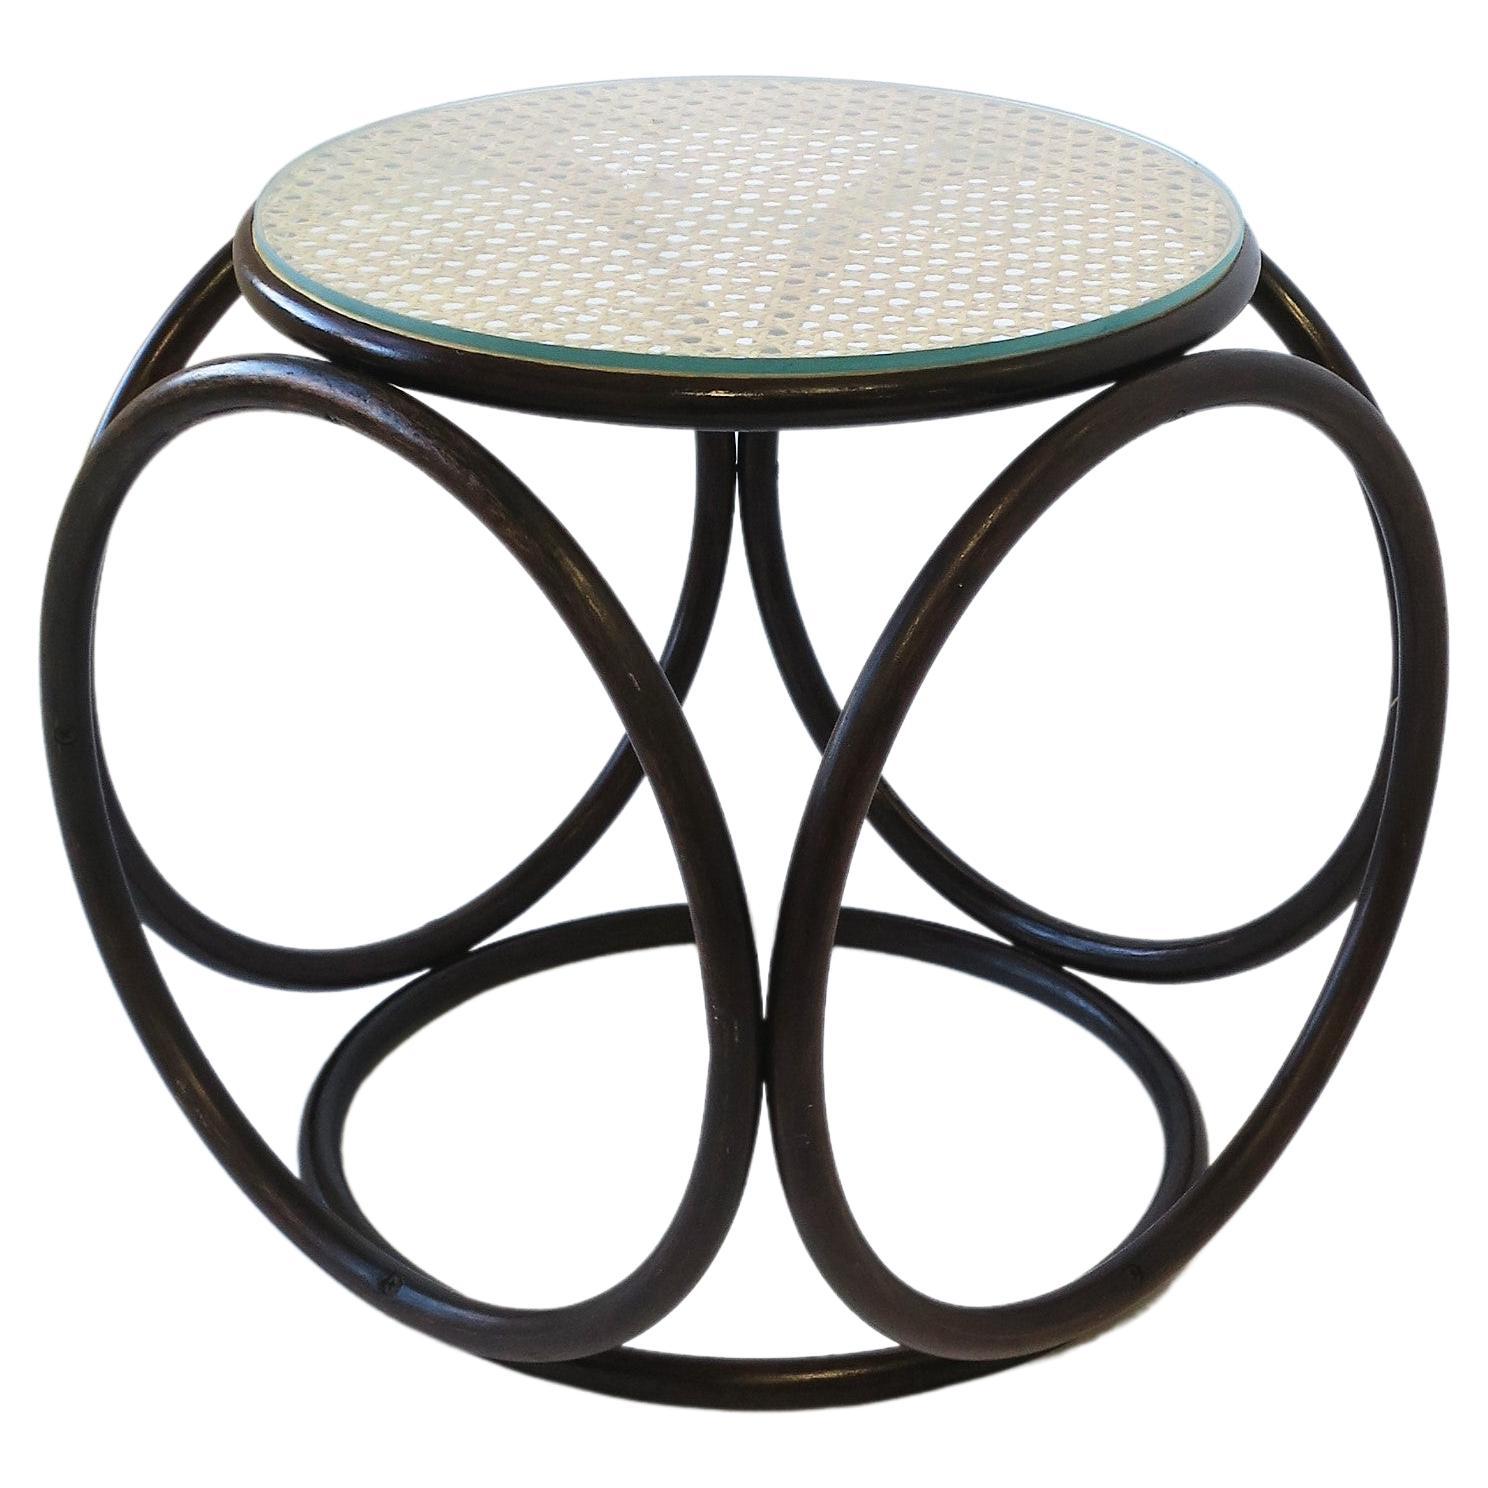 Thonet Bentwood Cane and Glass Top Side Table or Stool